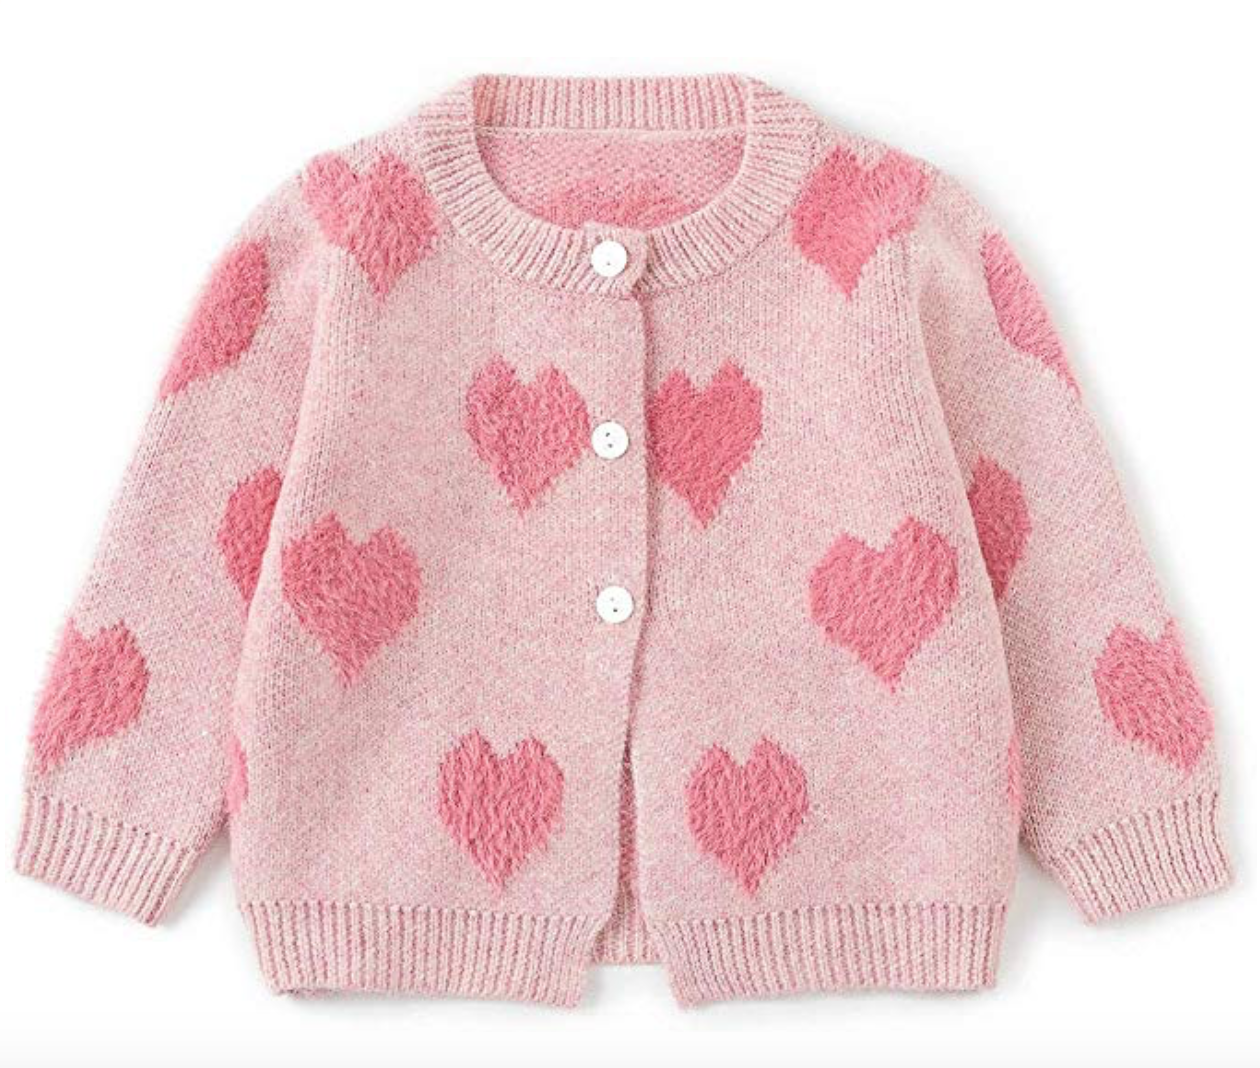 Simplee kids Baby Sweater Cable Knitting Thick Baby Unisex Cardigan for Autumn Fall 3-24 Months